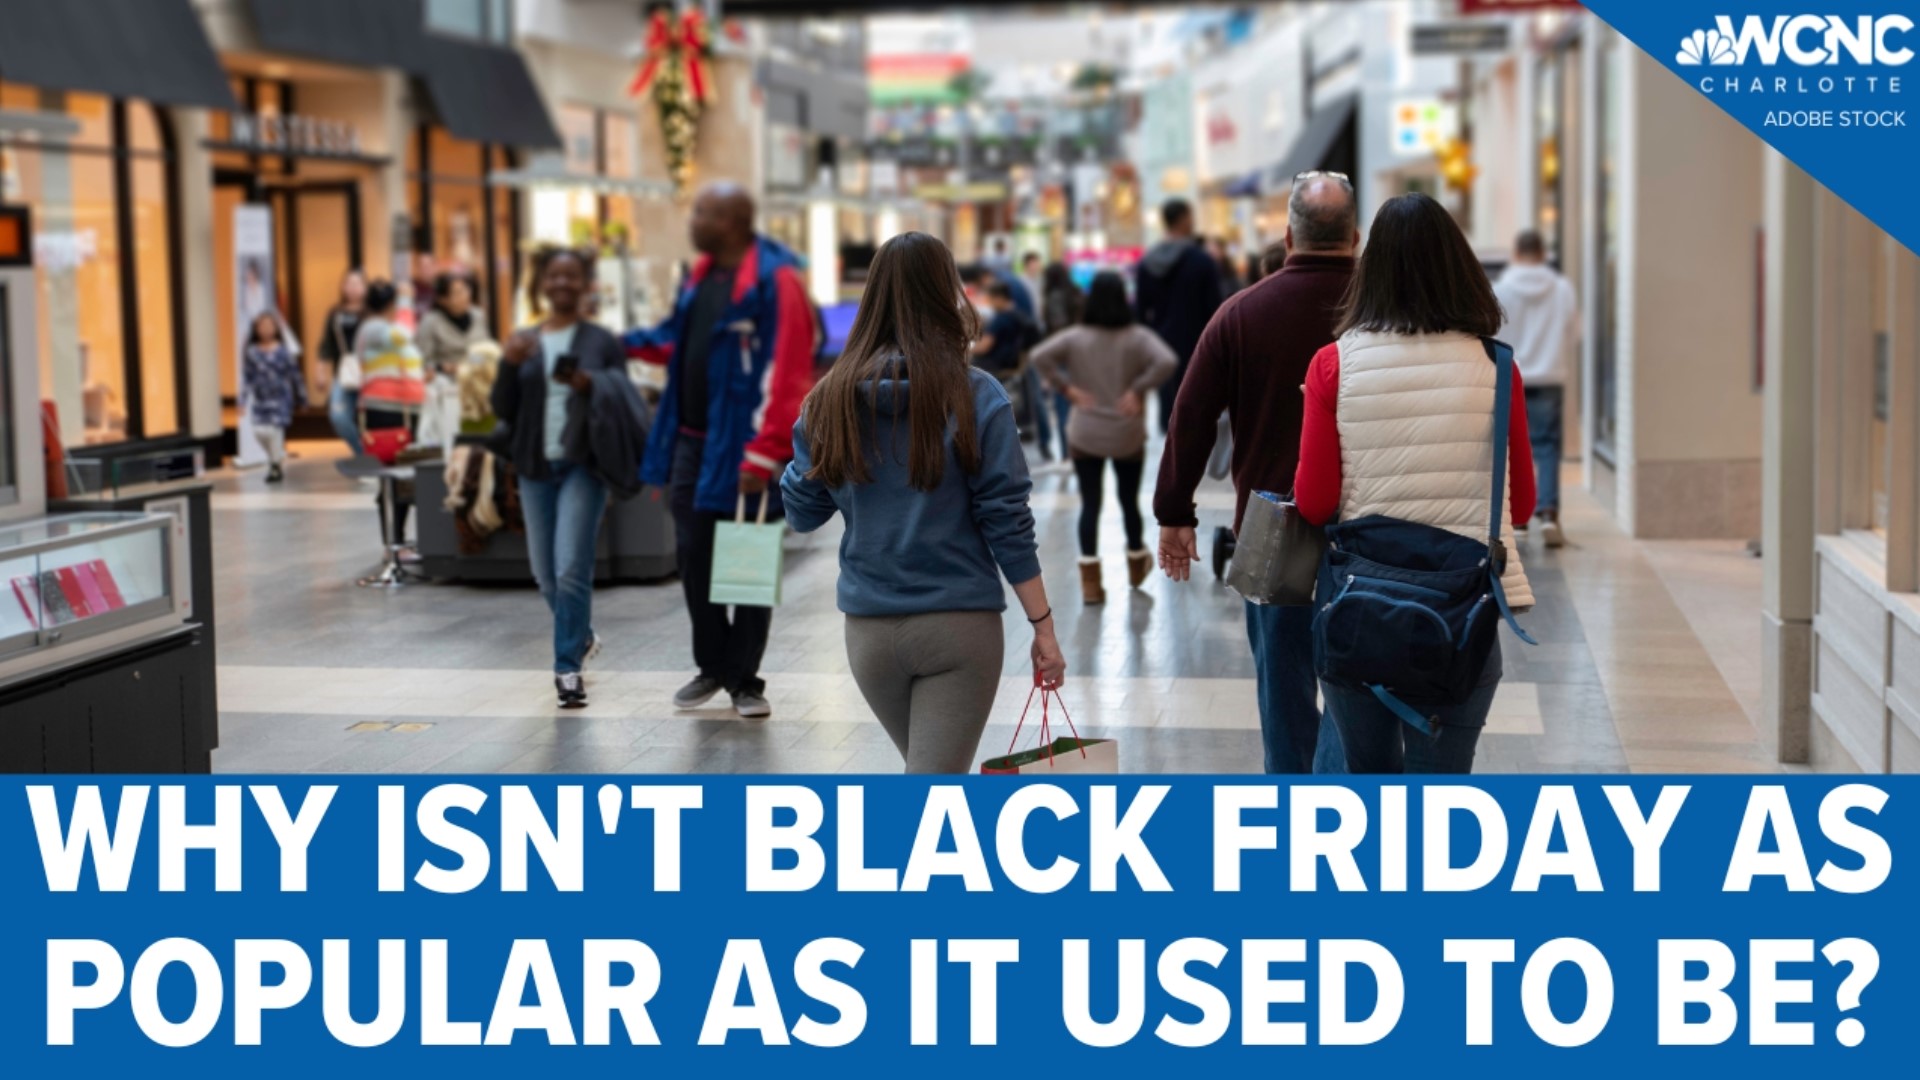 More and more people are ditching the holiday and choosing to shop online or earlier in the year.